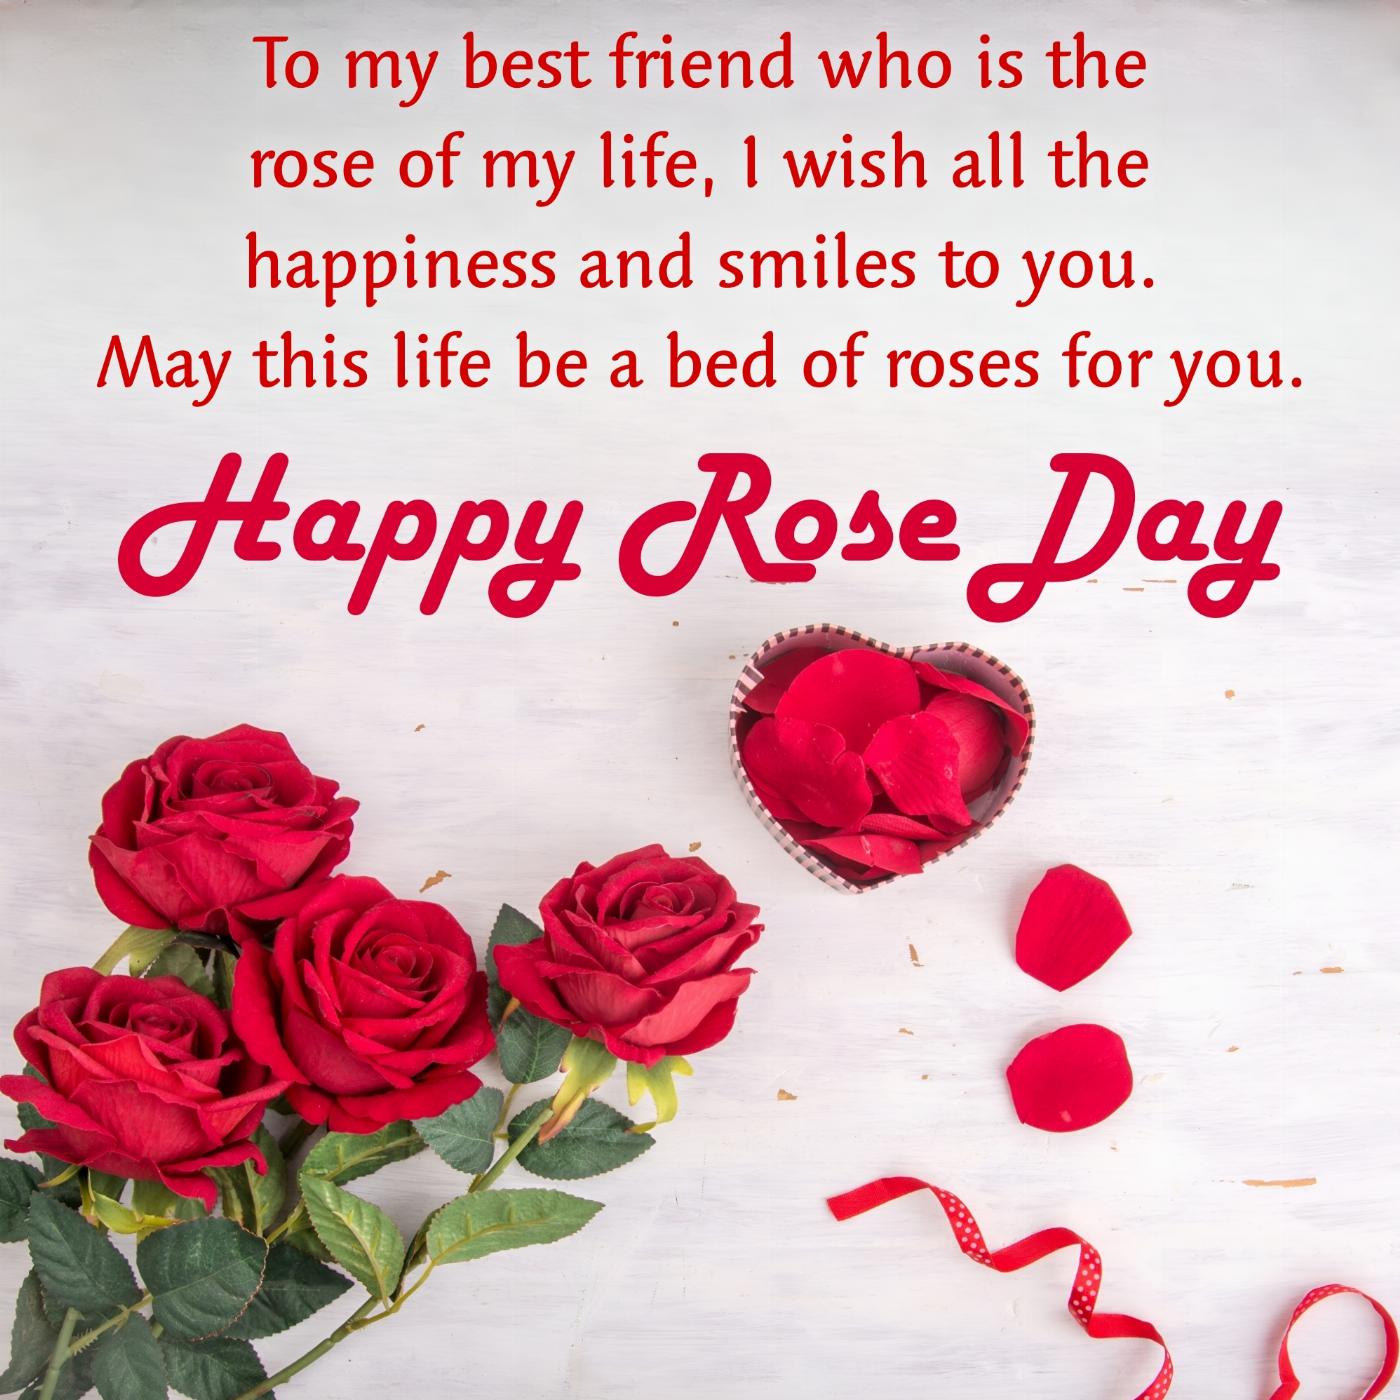 To my best friend who is the rose of my life